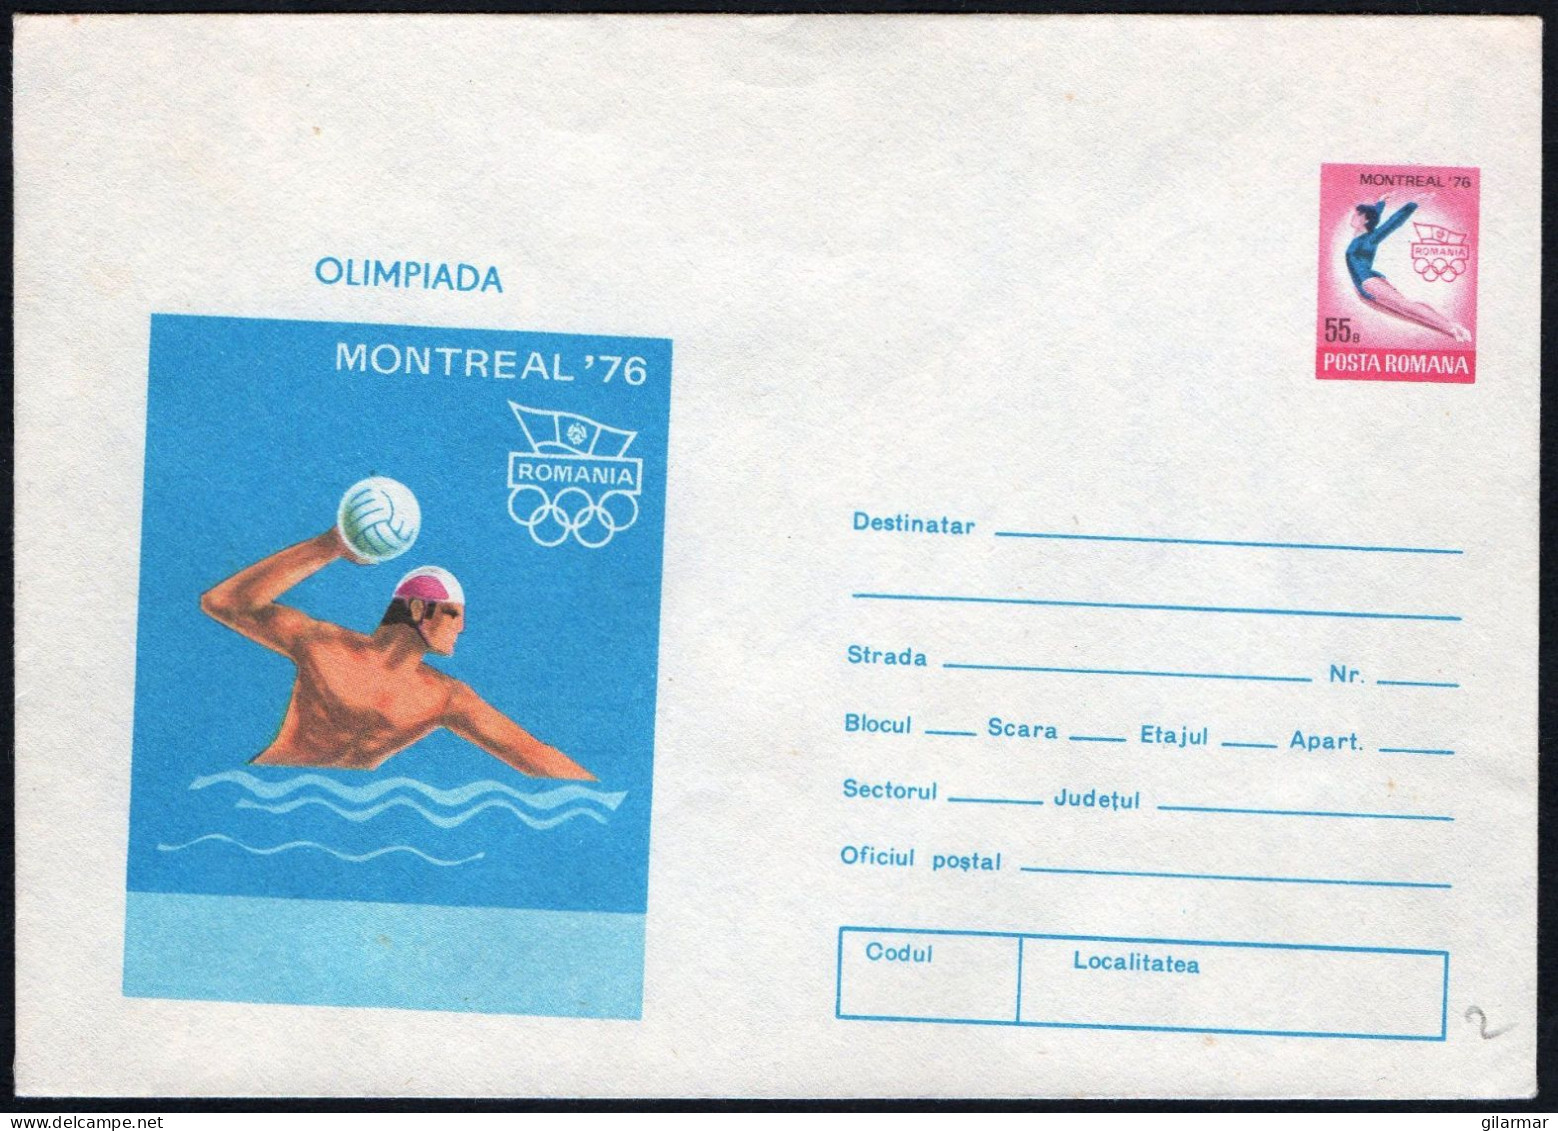 ROMANIA 1976 - OLYMPIC GAMES MONTREAL 1976 - STATIONARY: WATER POLO - MINT - G - Water Polo